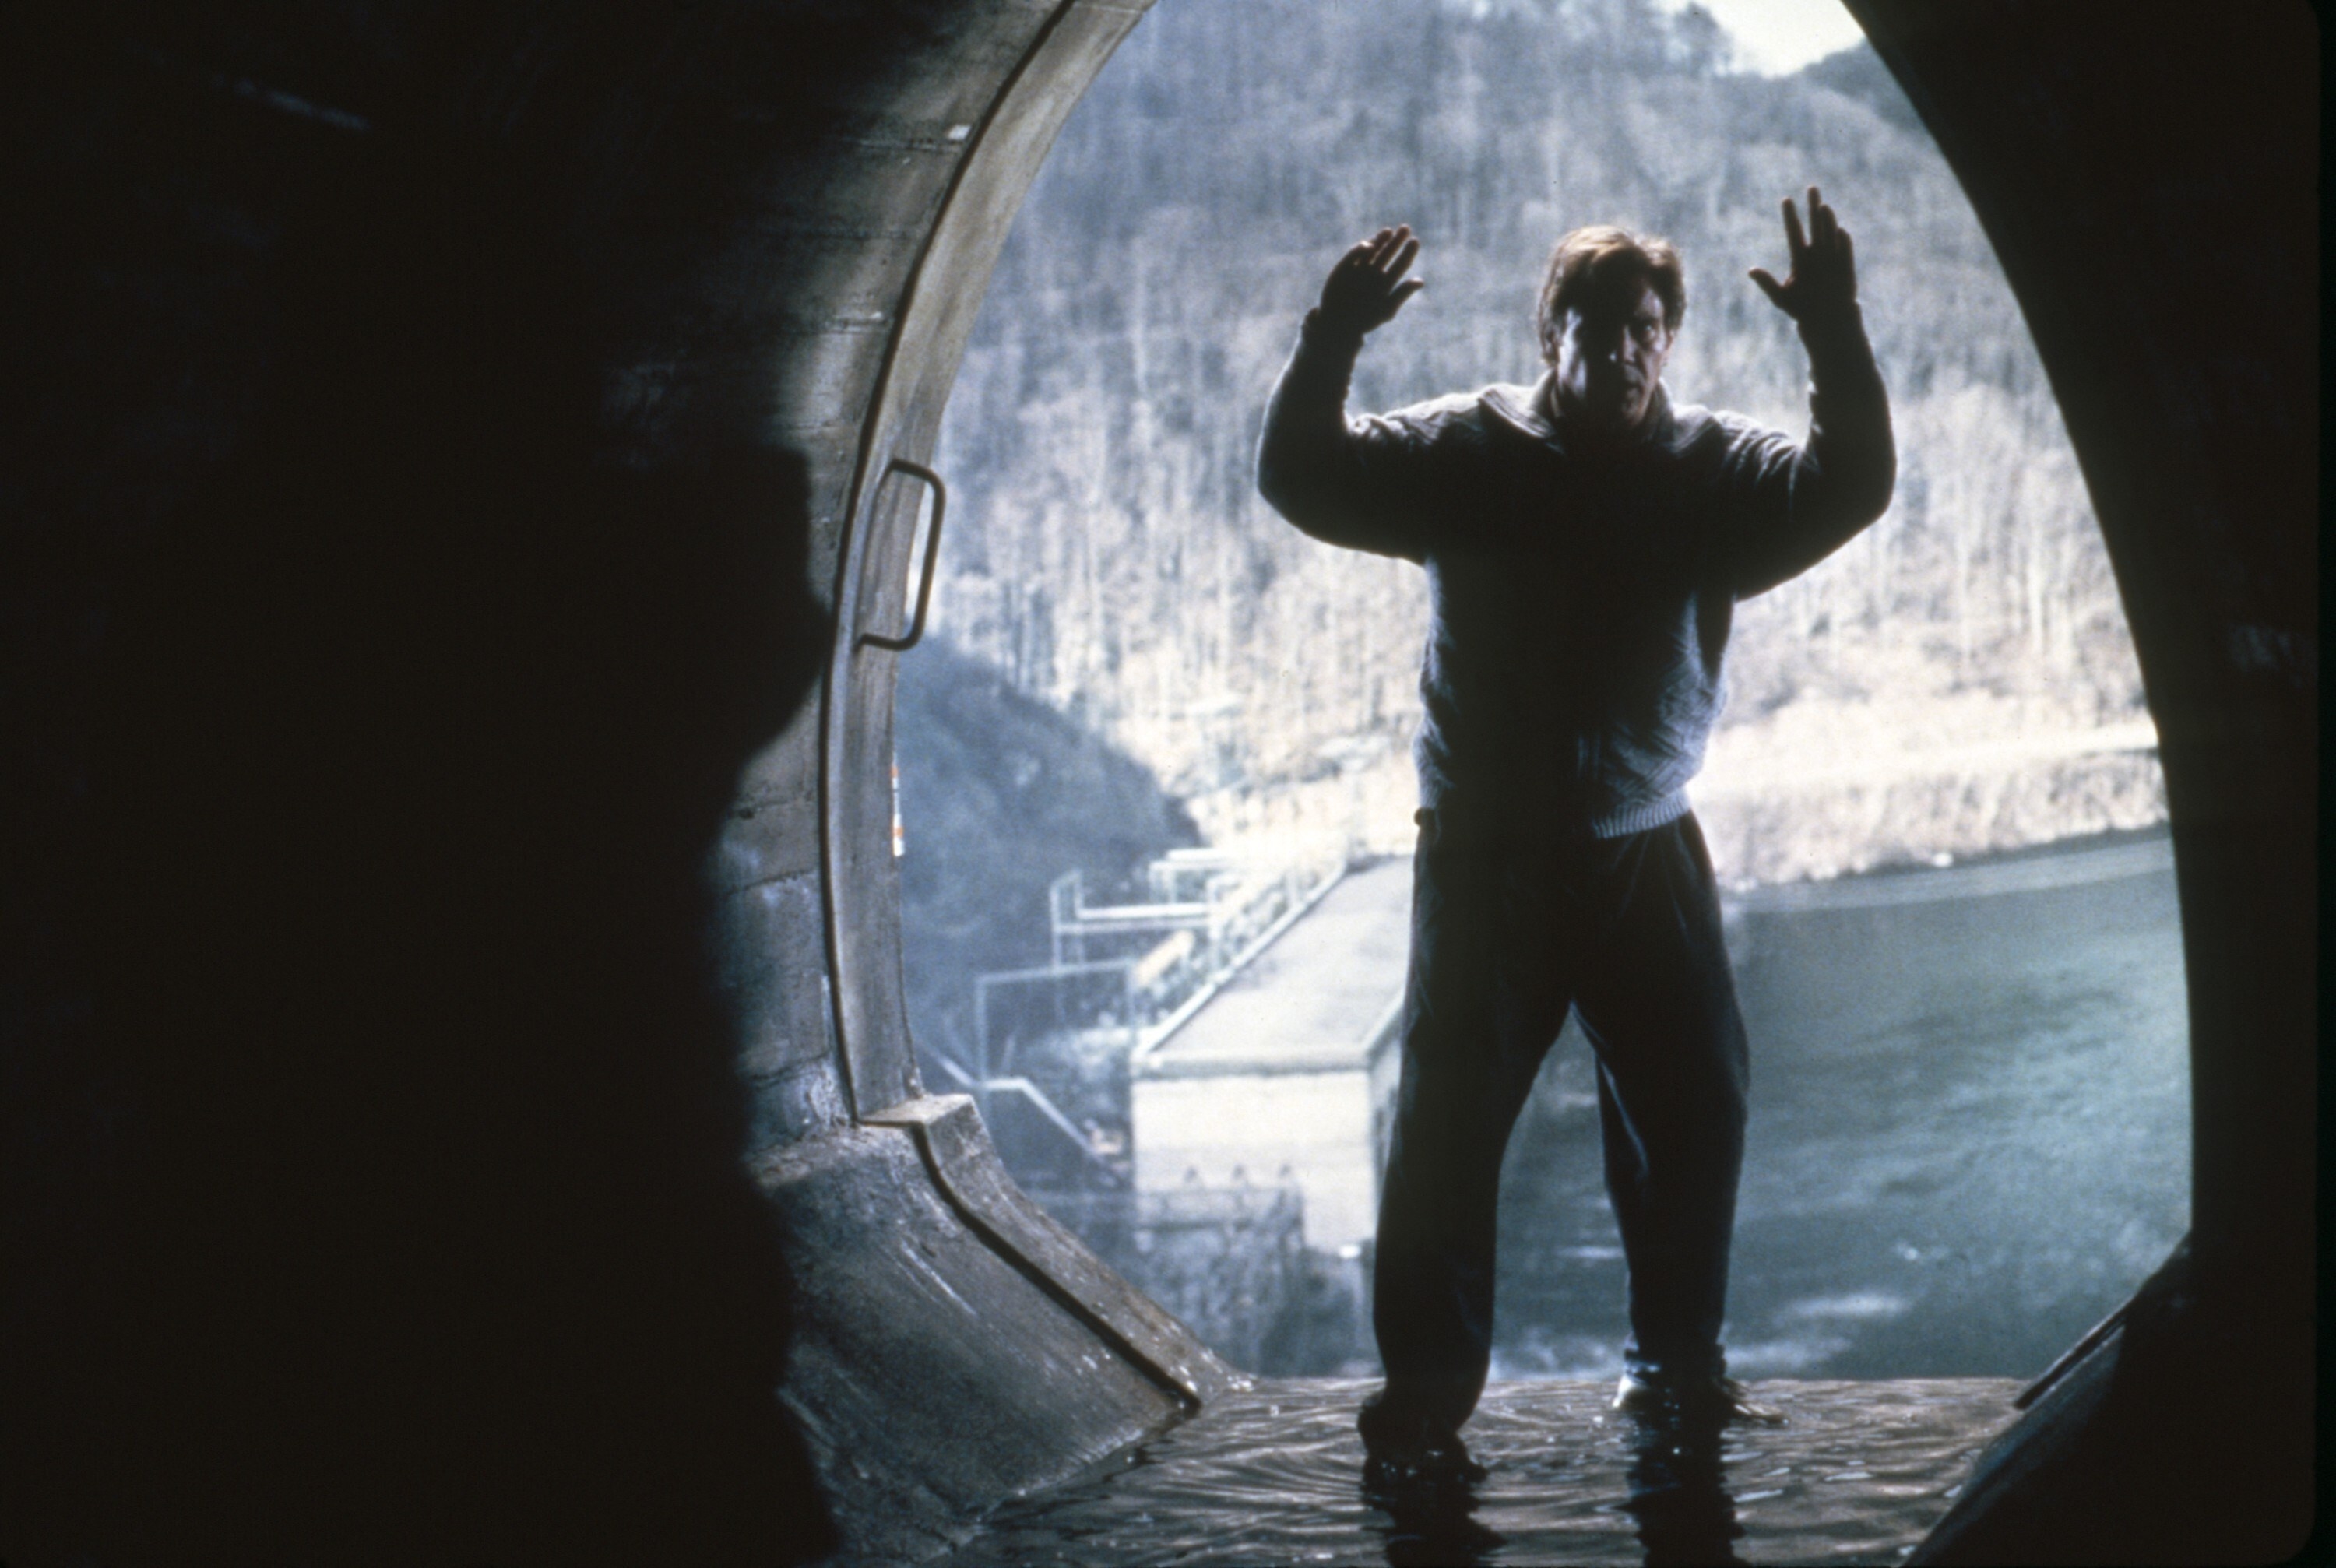 Harrison Ford with his hands up in surrender in a large drain pipe